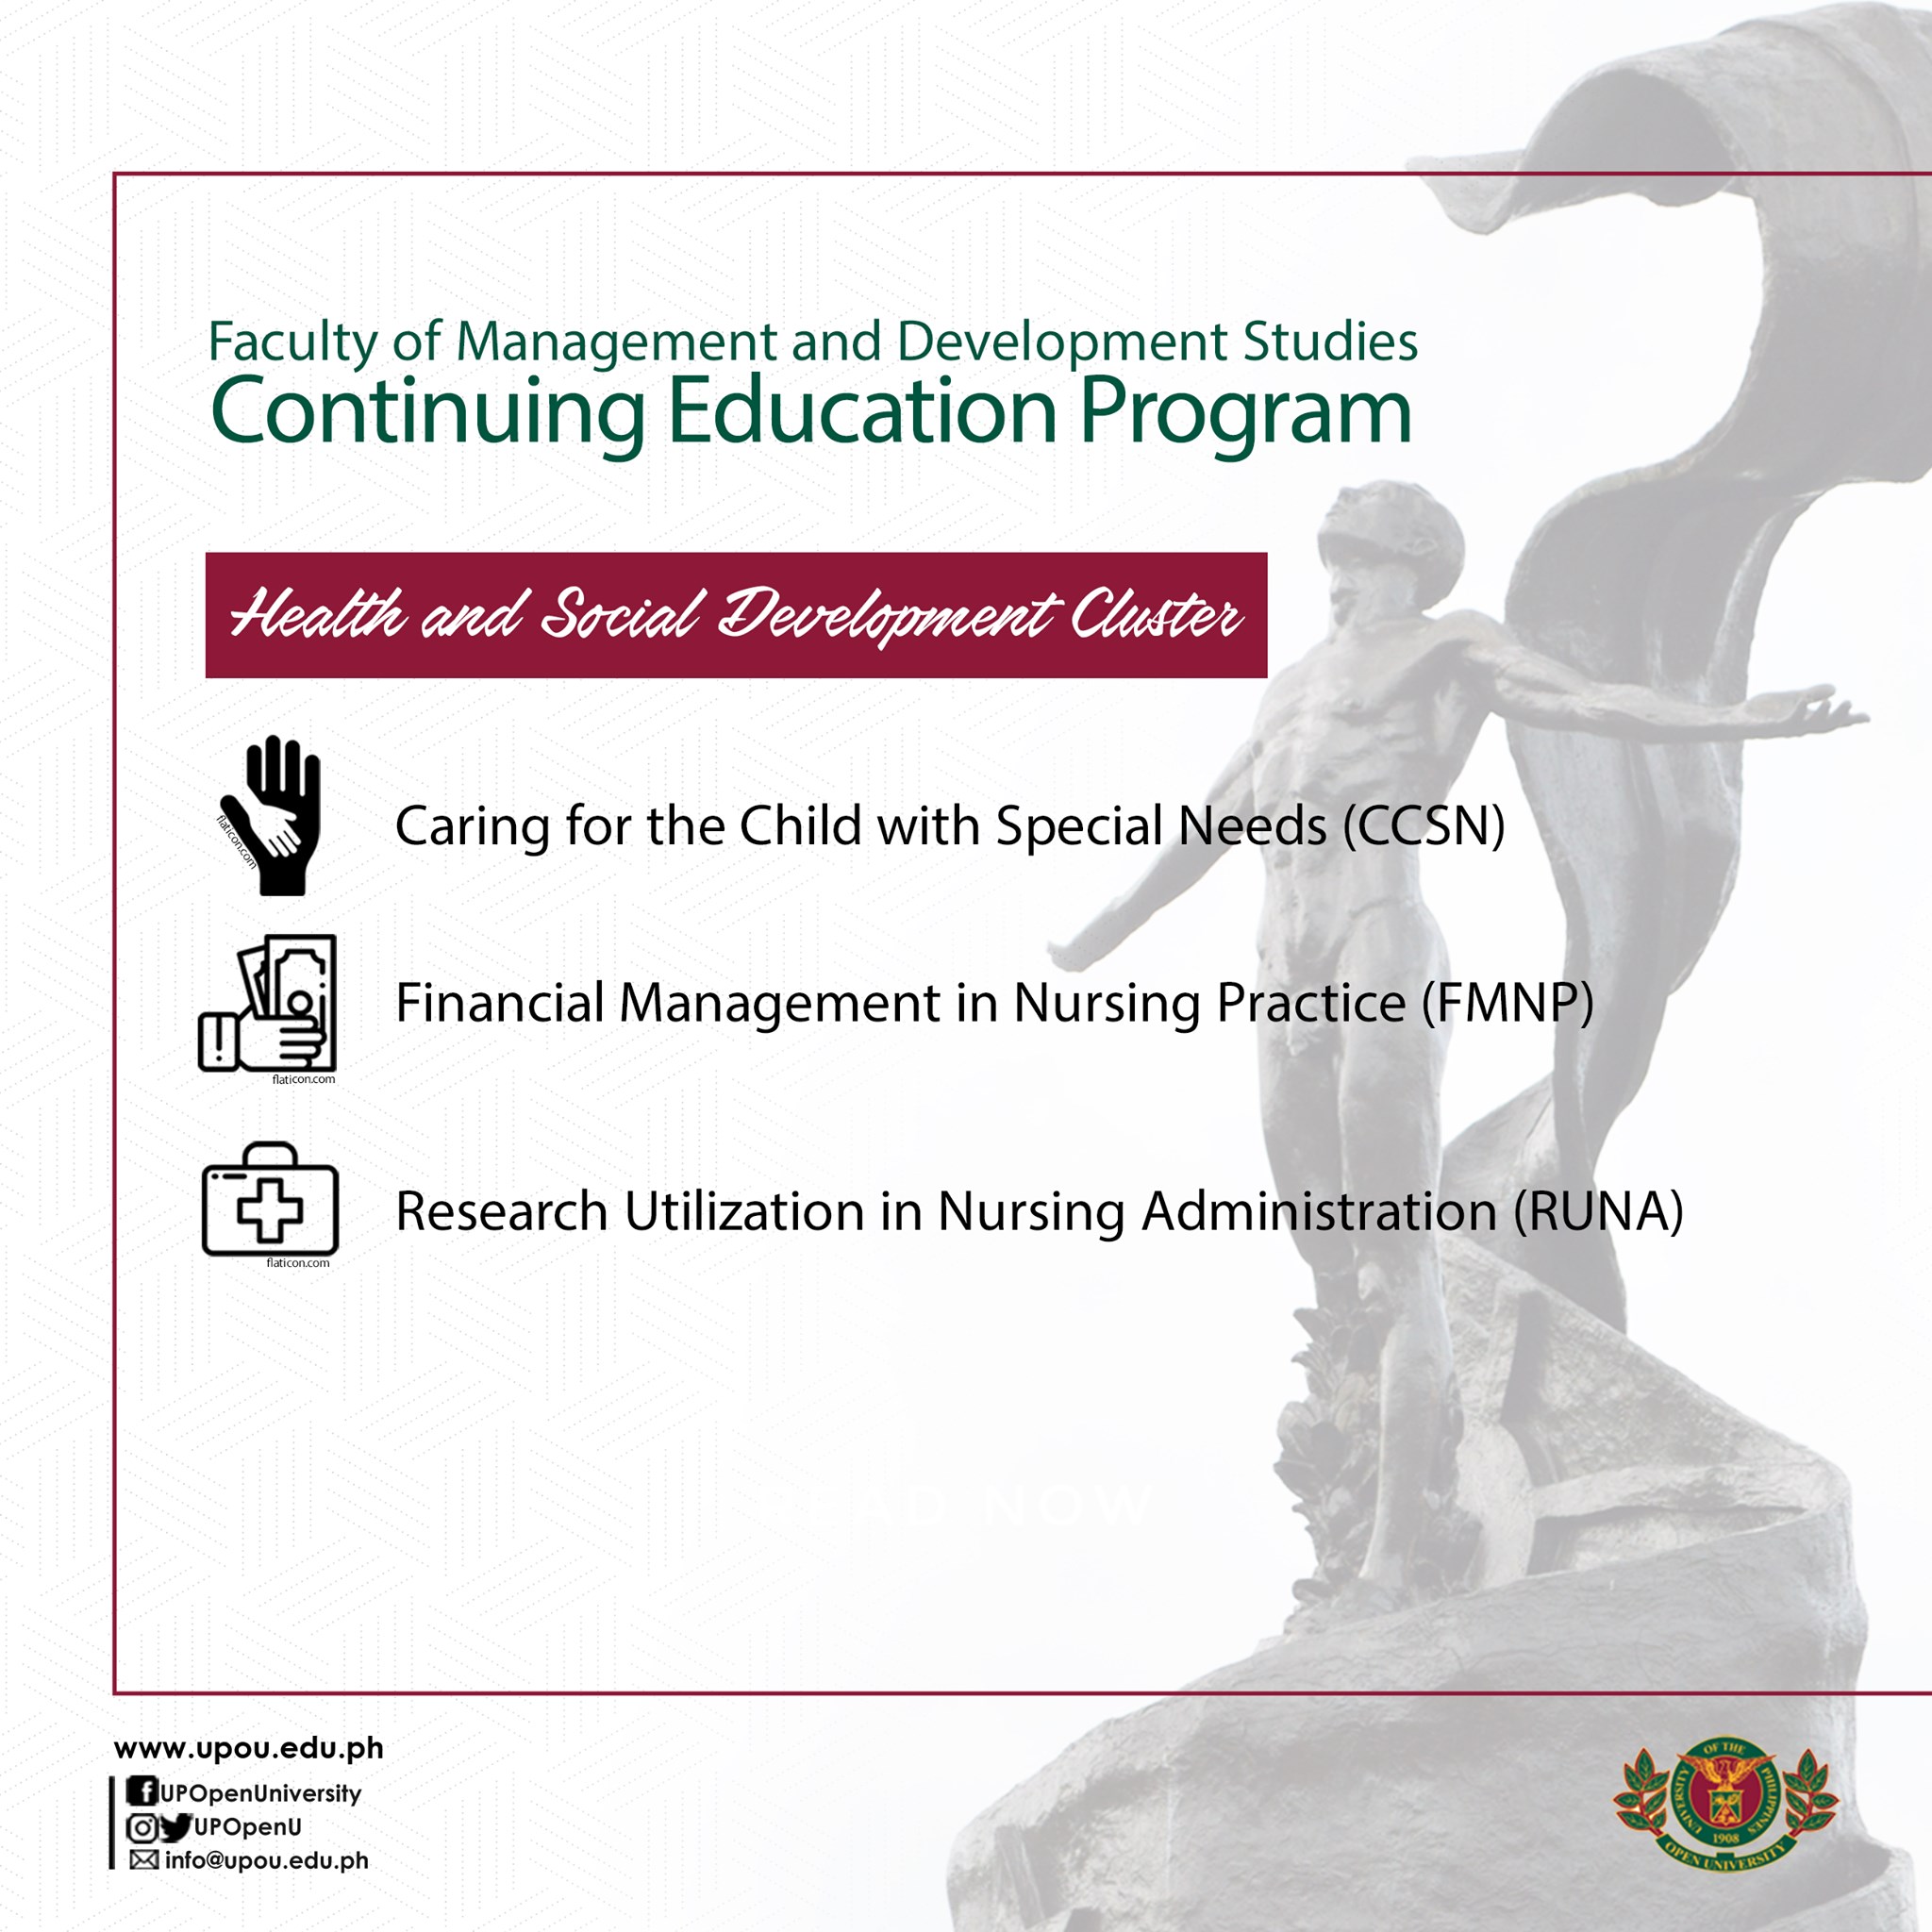 Registration for Continuing Education Programs is extended until 15 February 2020.